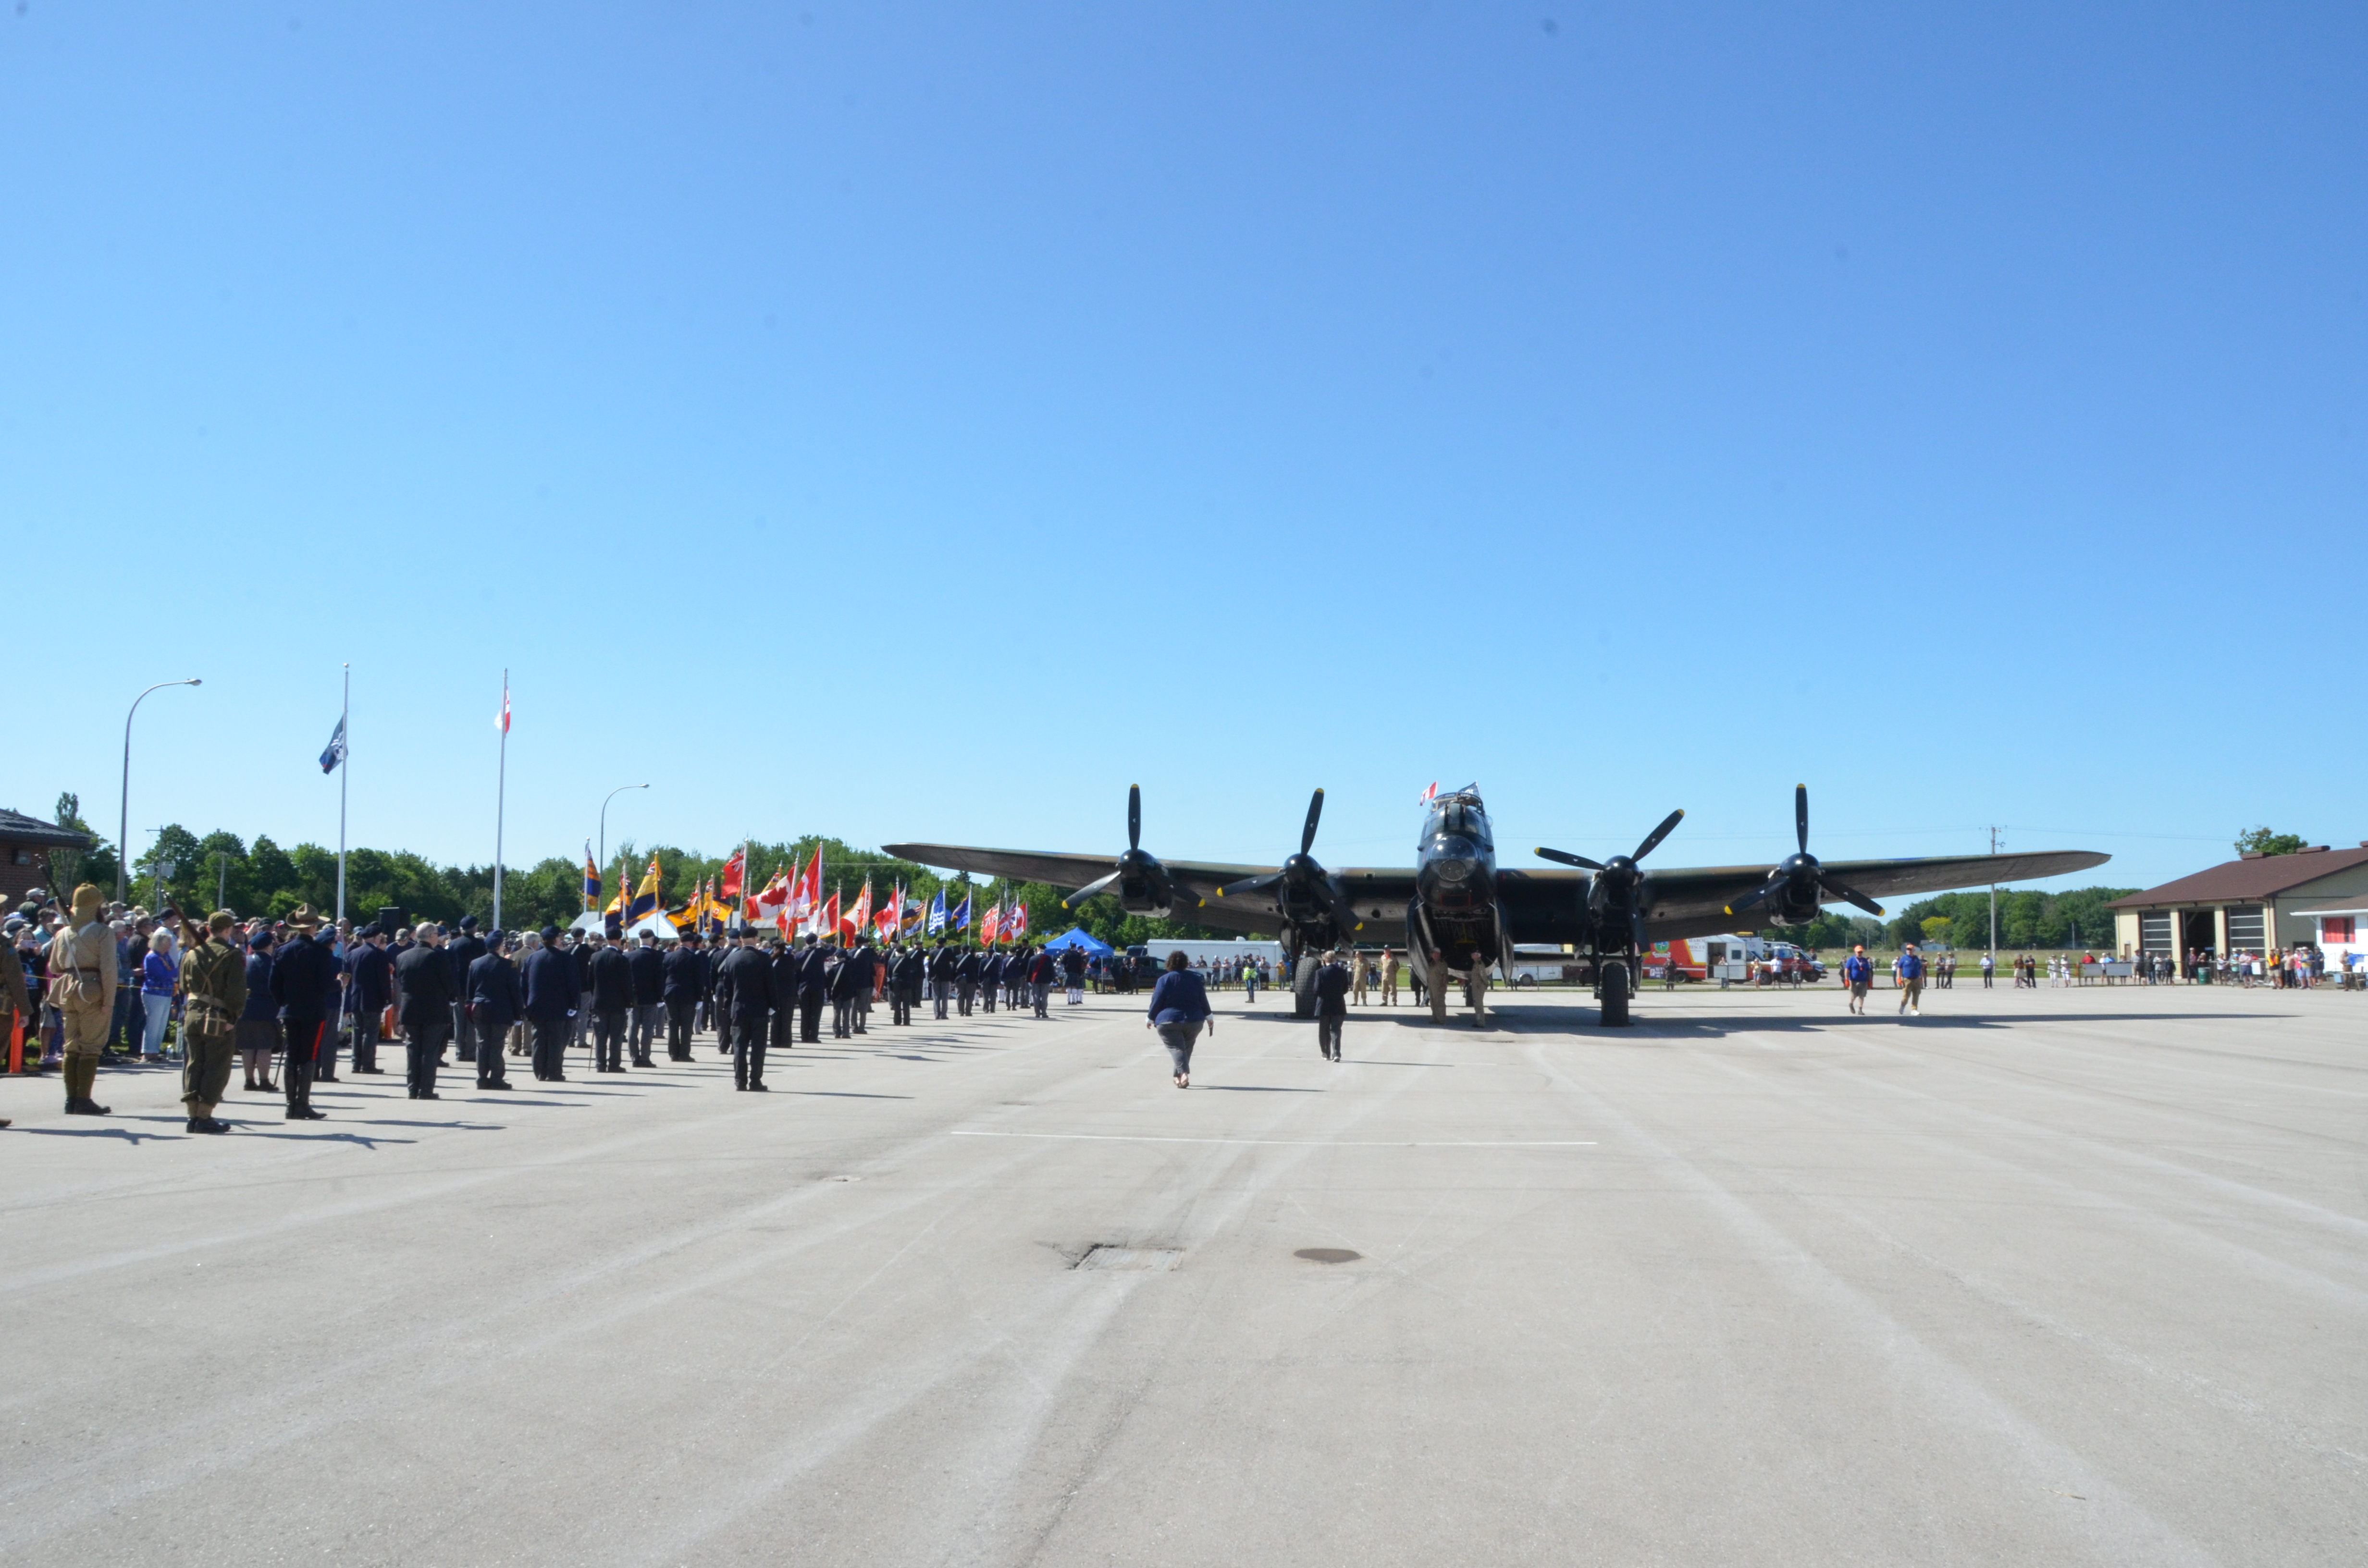 The Lancaster parked on the main ramp at Goderich. Legion members and public awaiting the beginning of the speeches.